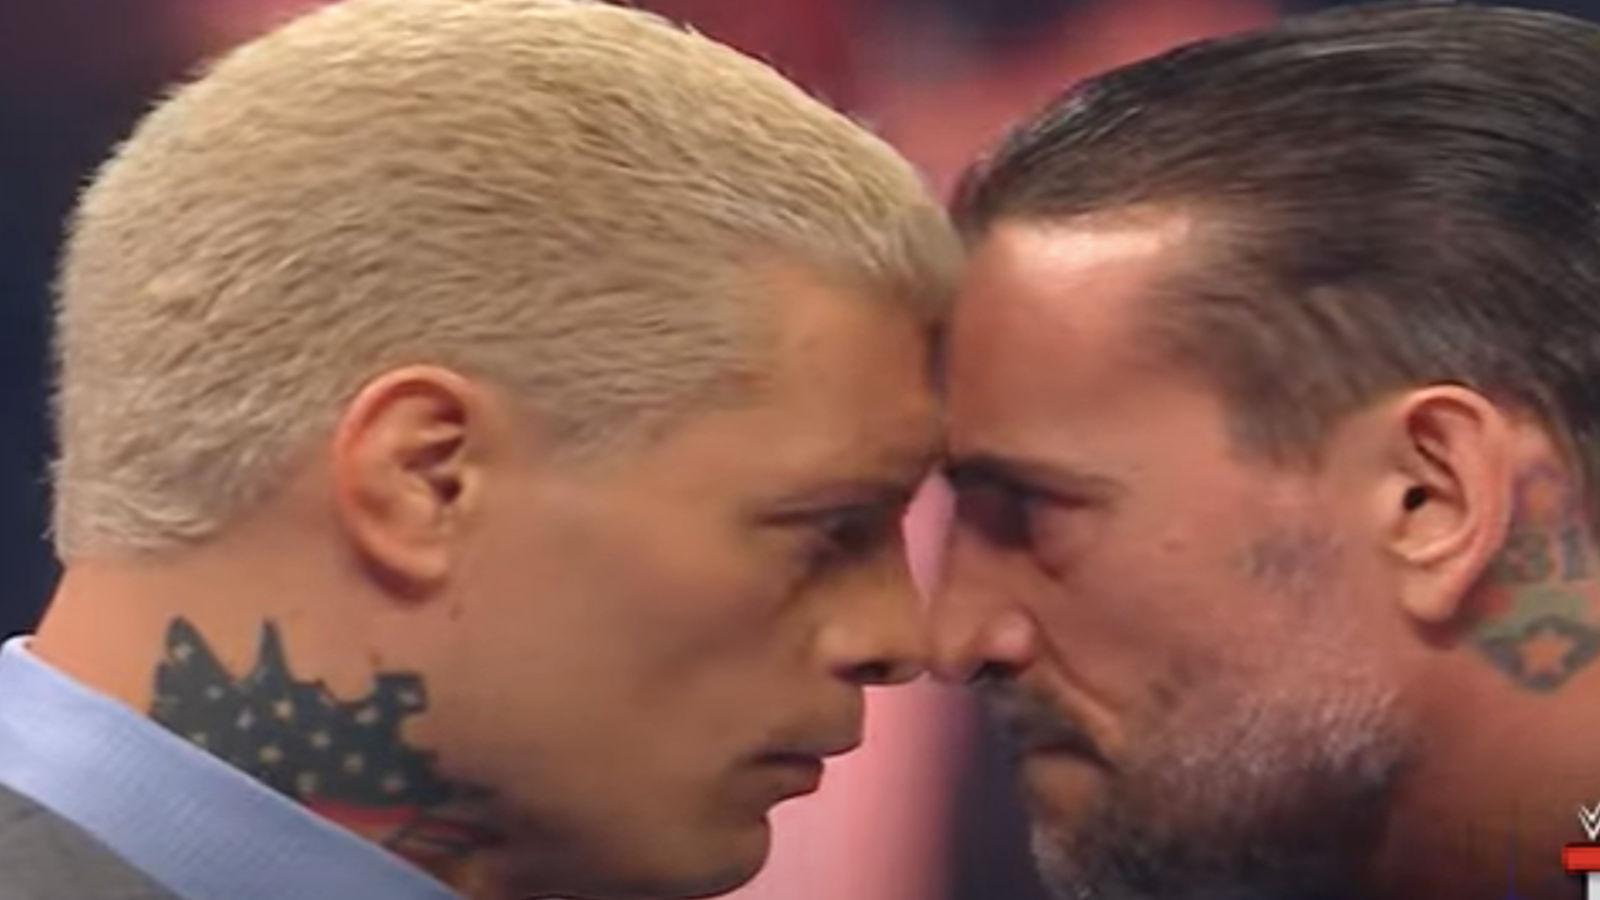 CM Punk faces off with Cody Rhodes.